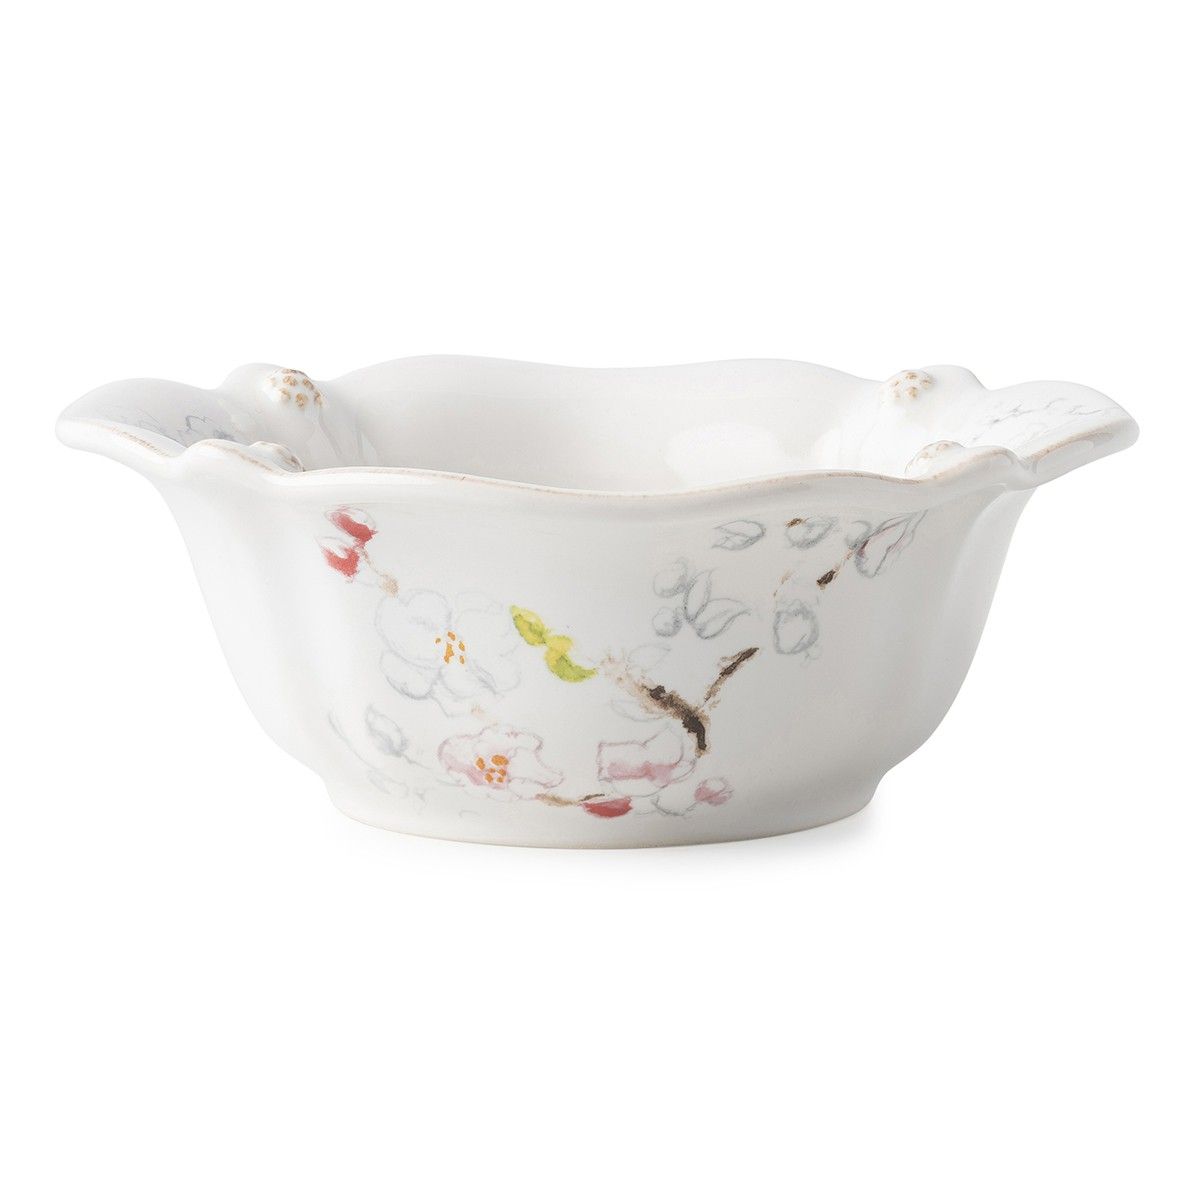 B&T Floral Sketch Cherry Blossom Cereal/Ice Cream Bowl